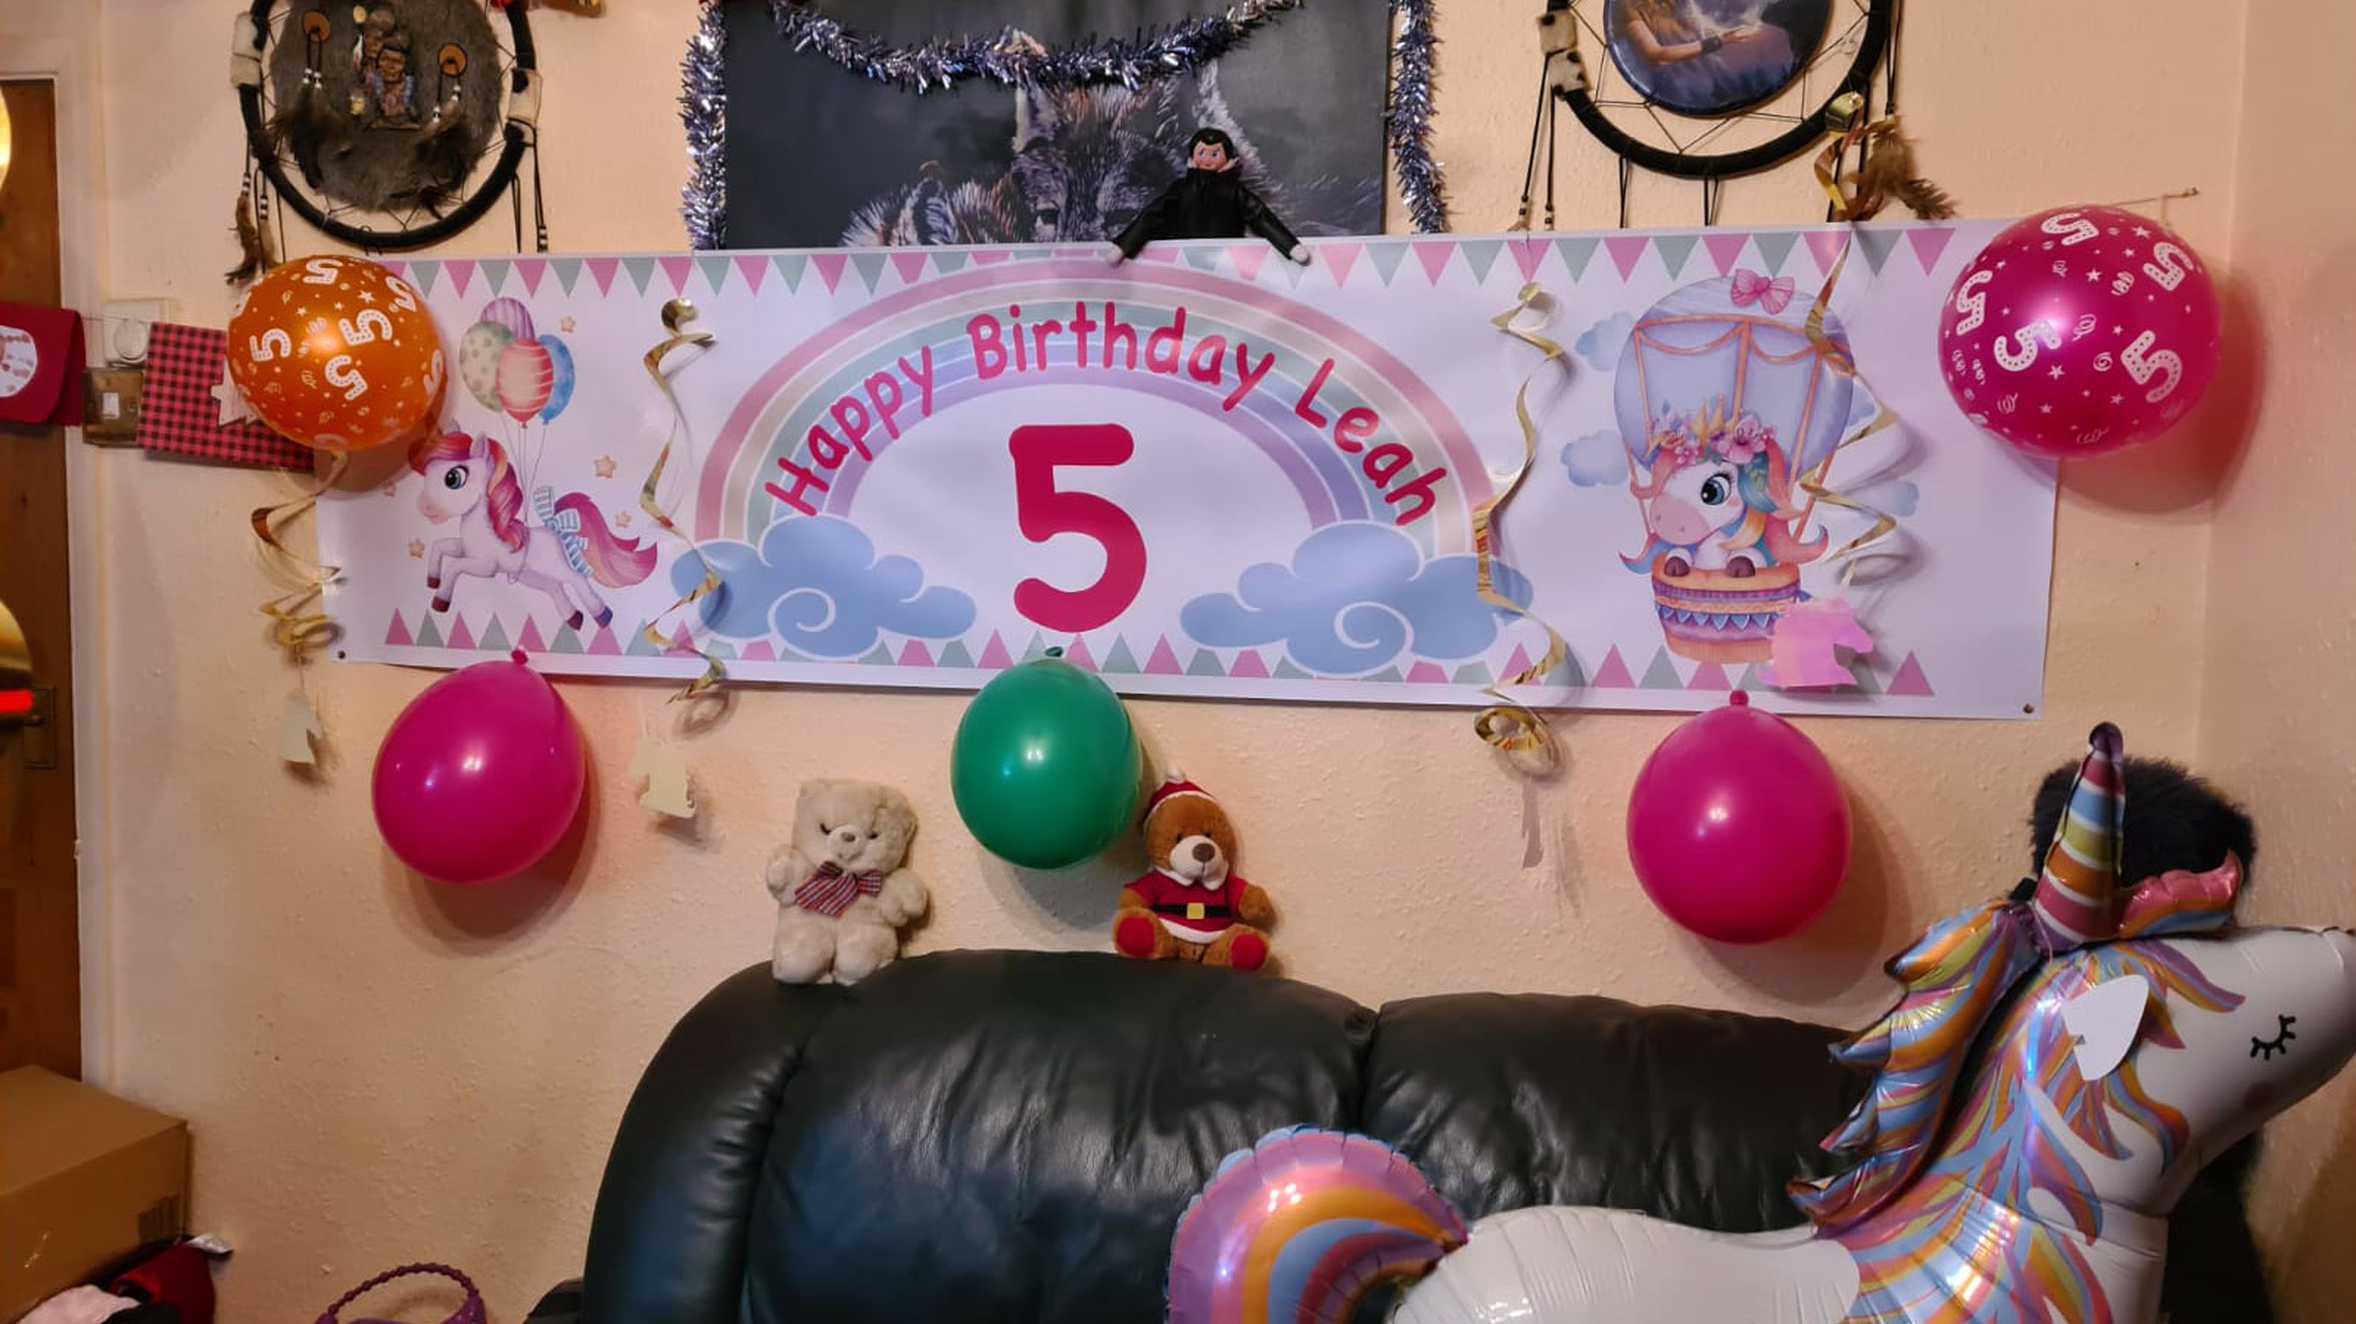 Leah's birthday decorations, including a large 'happy birthday' banner and unicorn balloon.